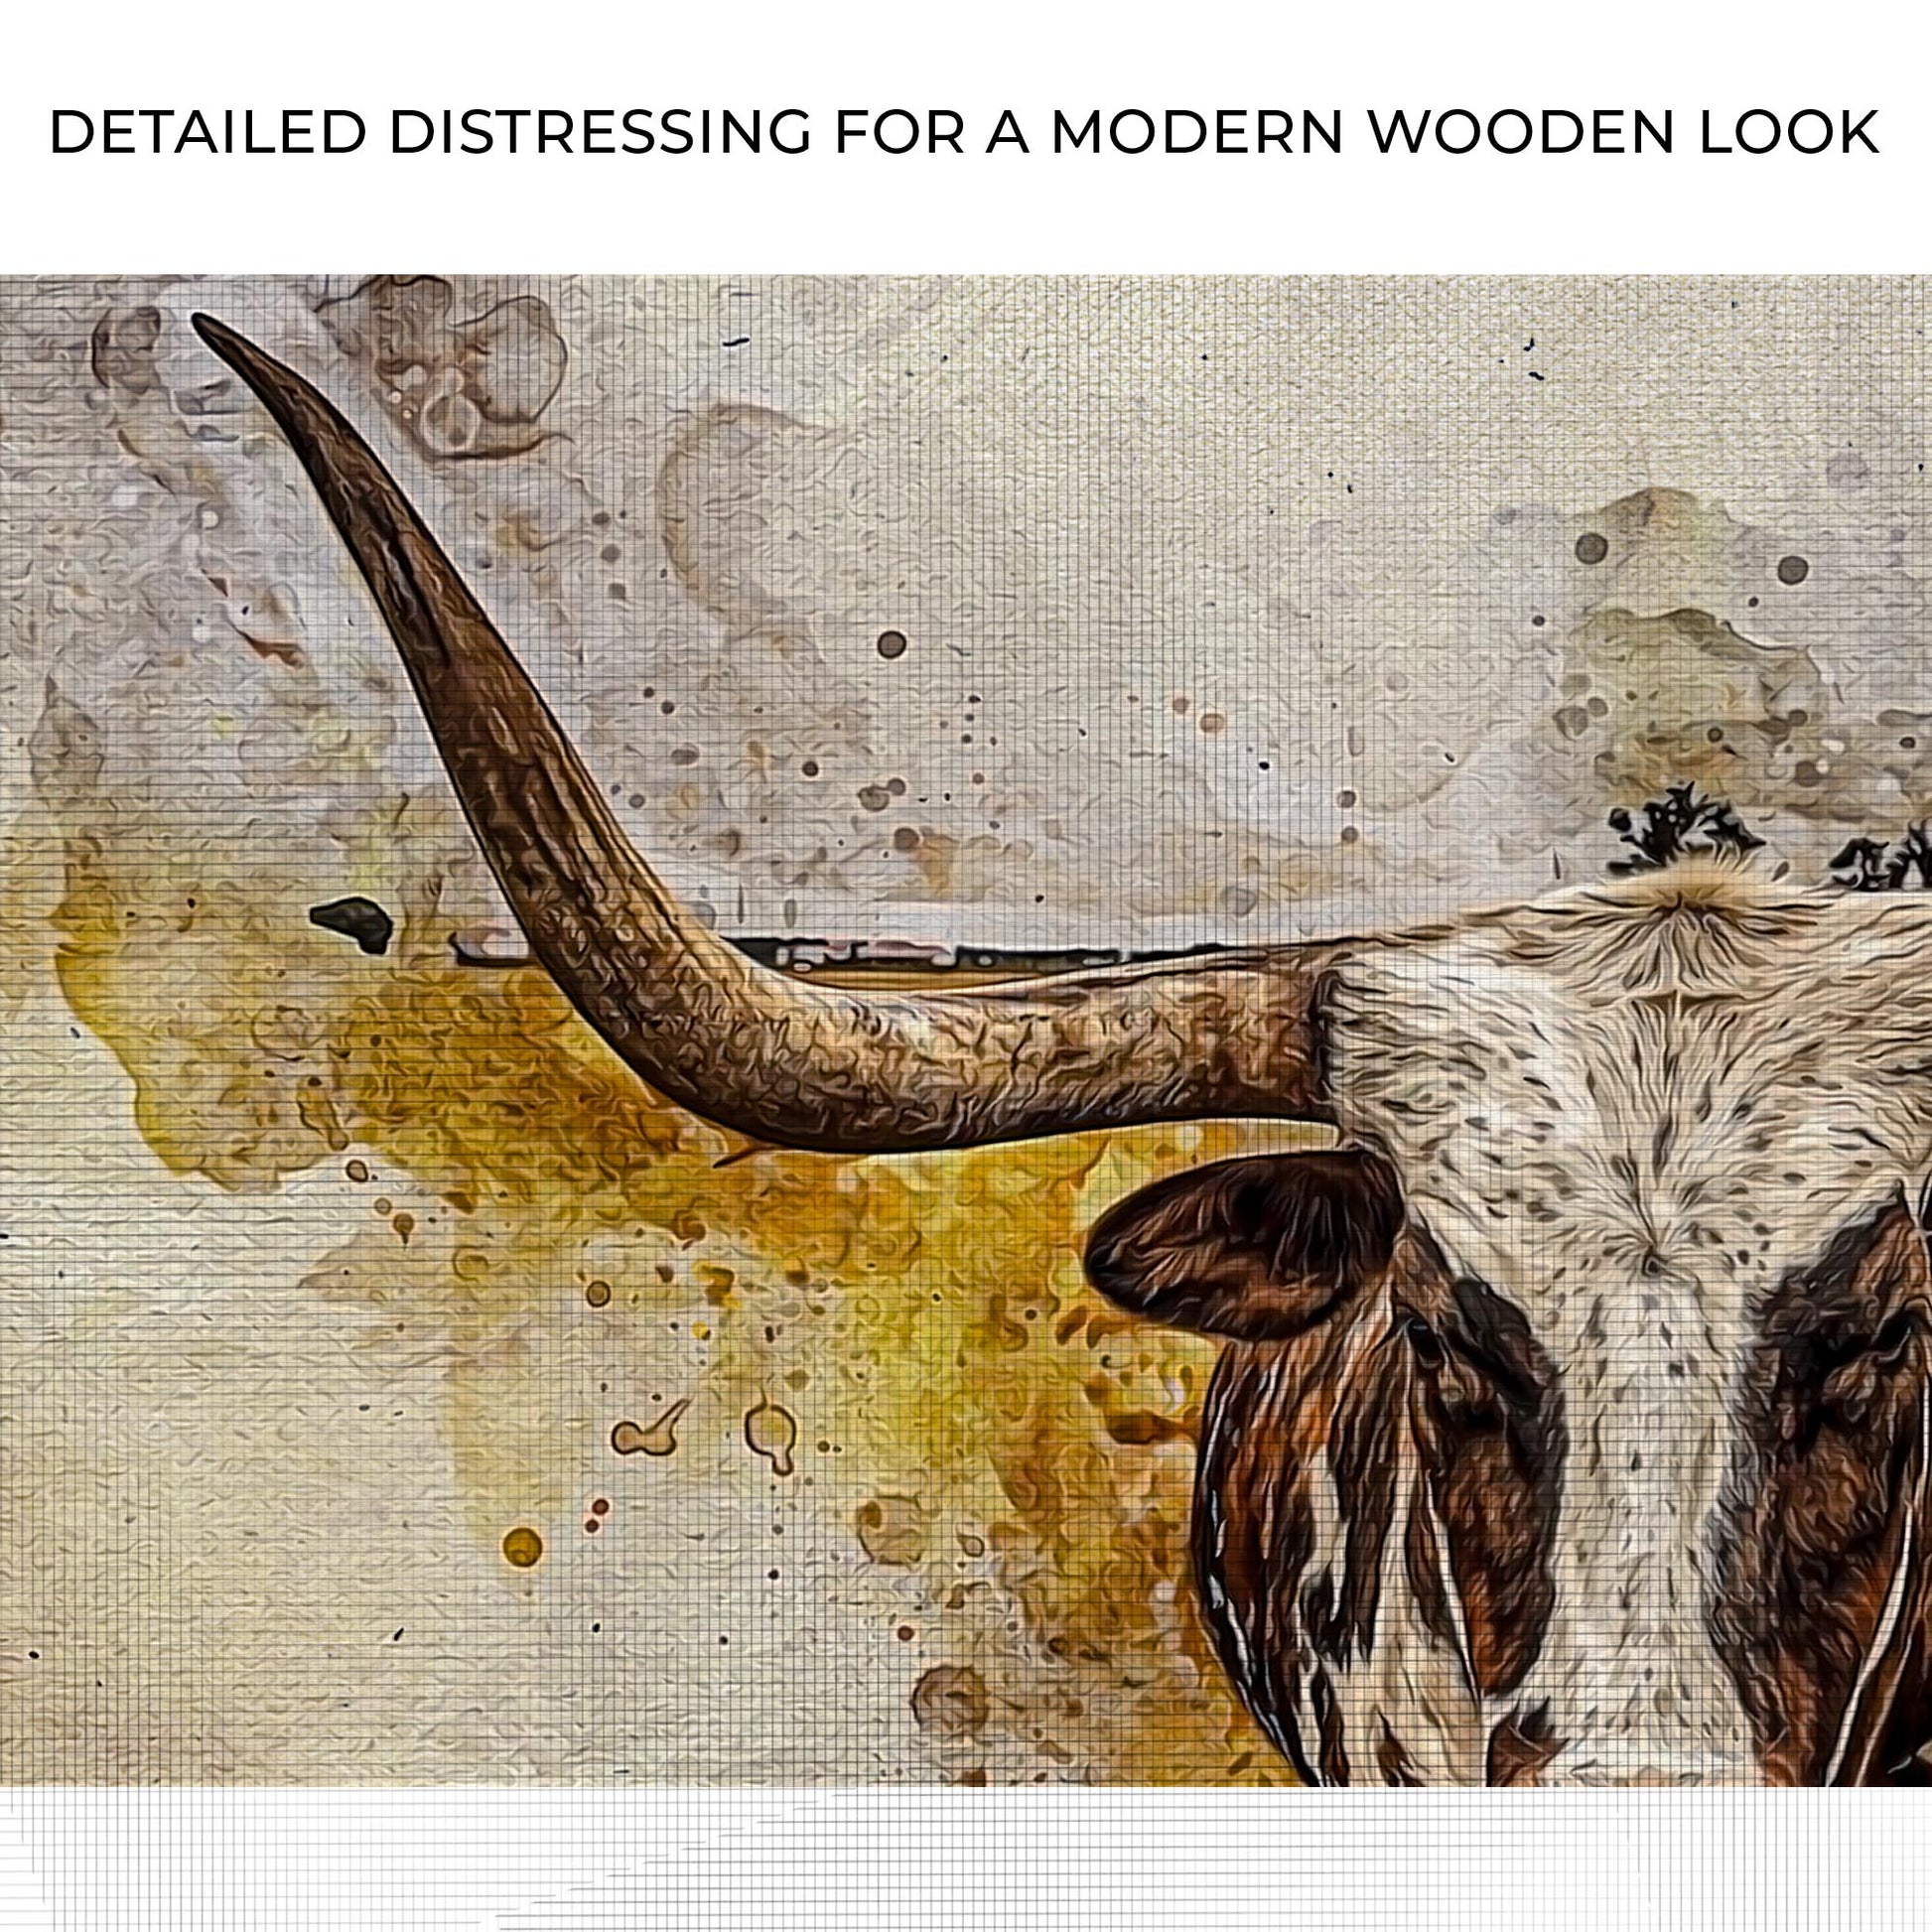 Texas Longhorn Watercolor Like Canvas Wall Art Zoom - Image by Tailored Canvases